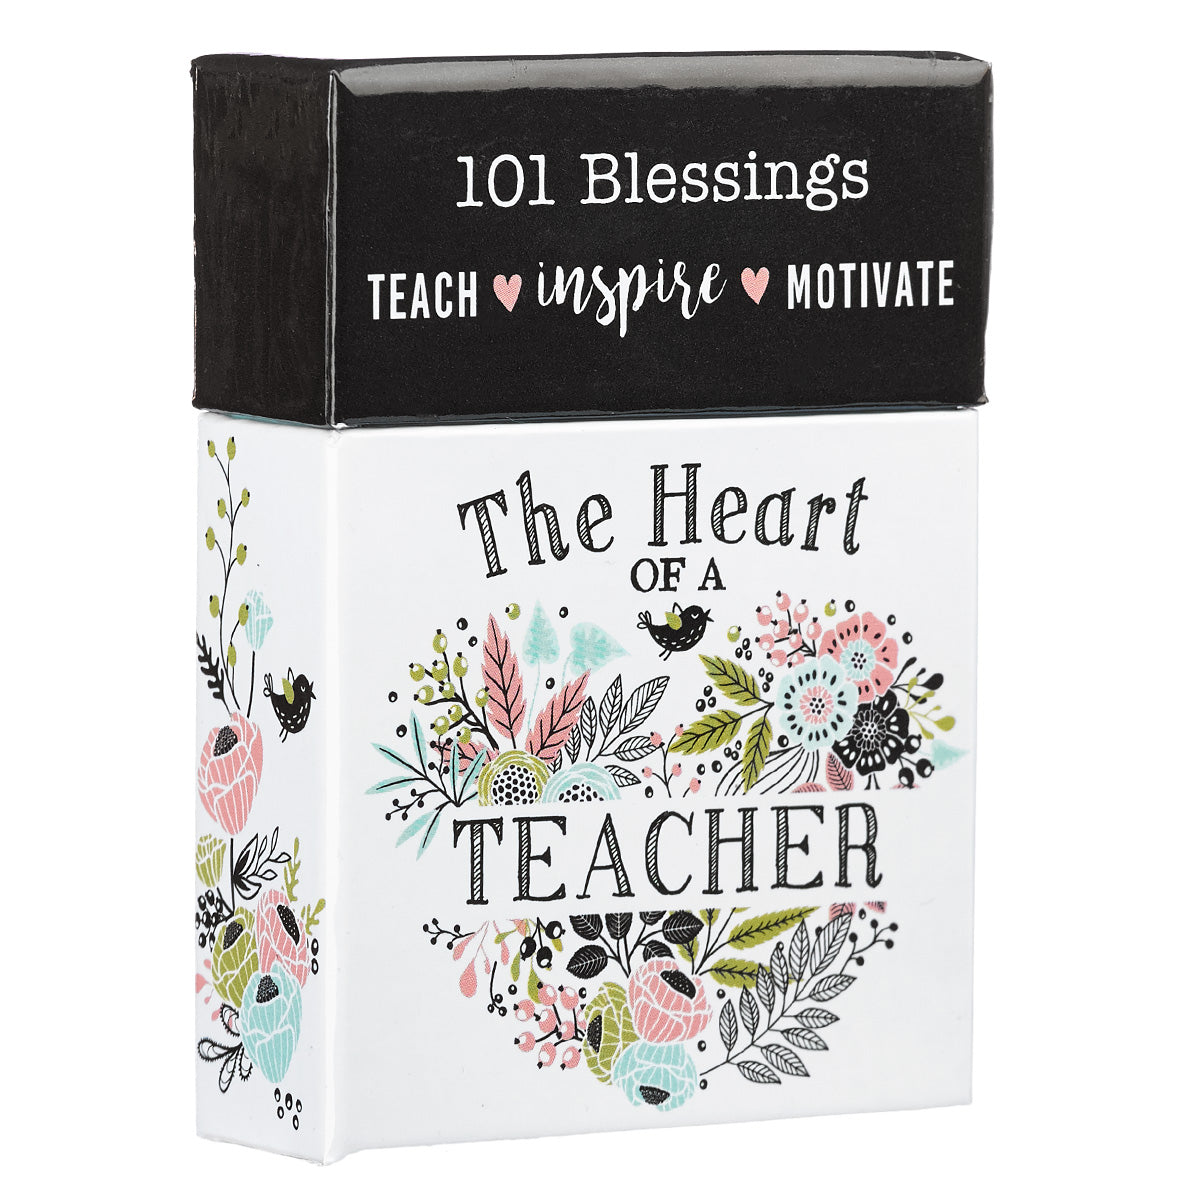 The Heart of a Teacher Box of Blessings - The Christian Gift Company